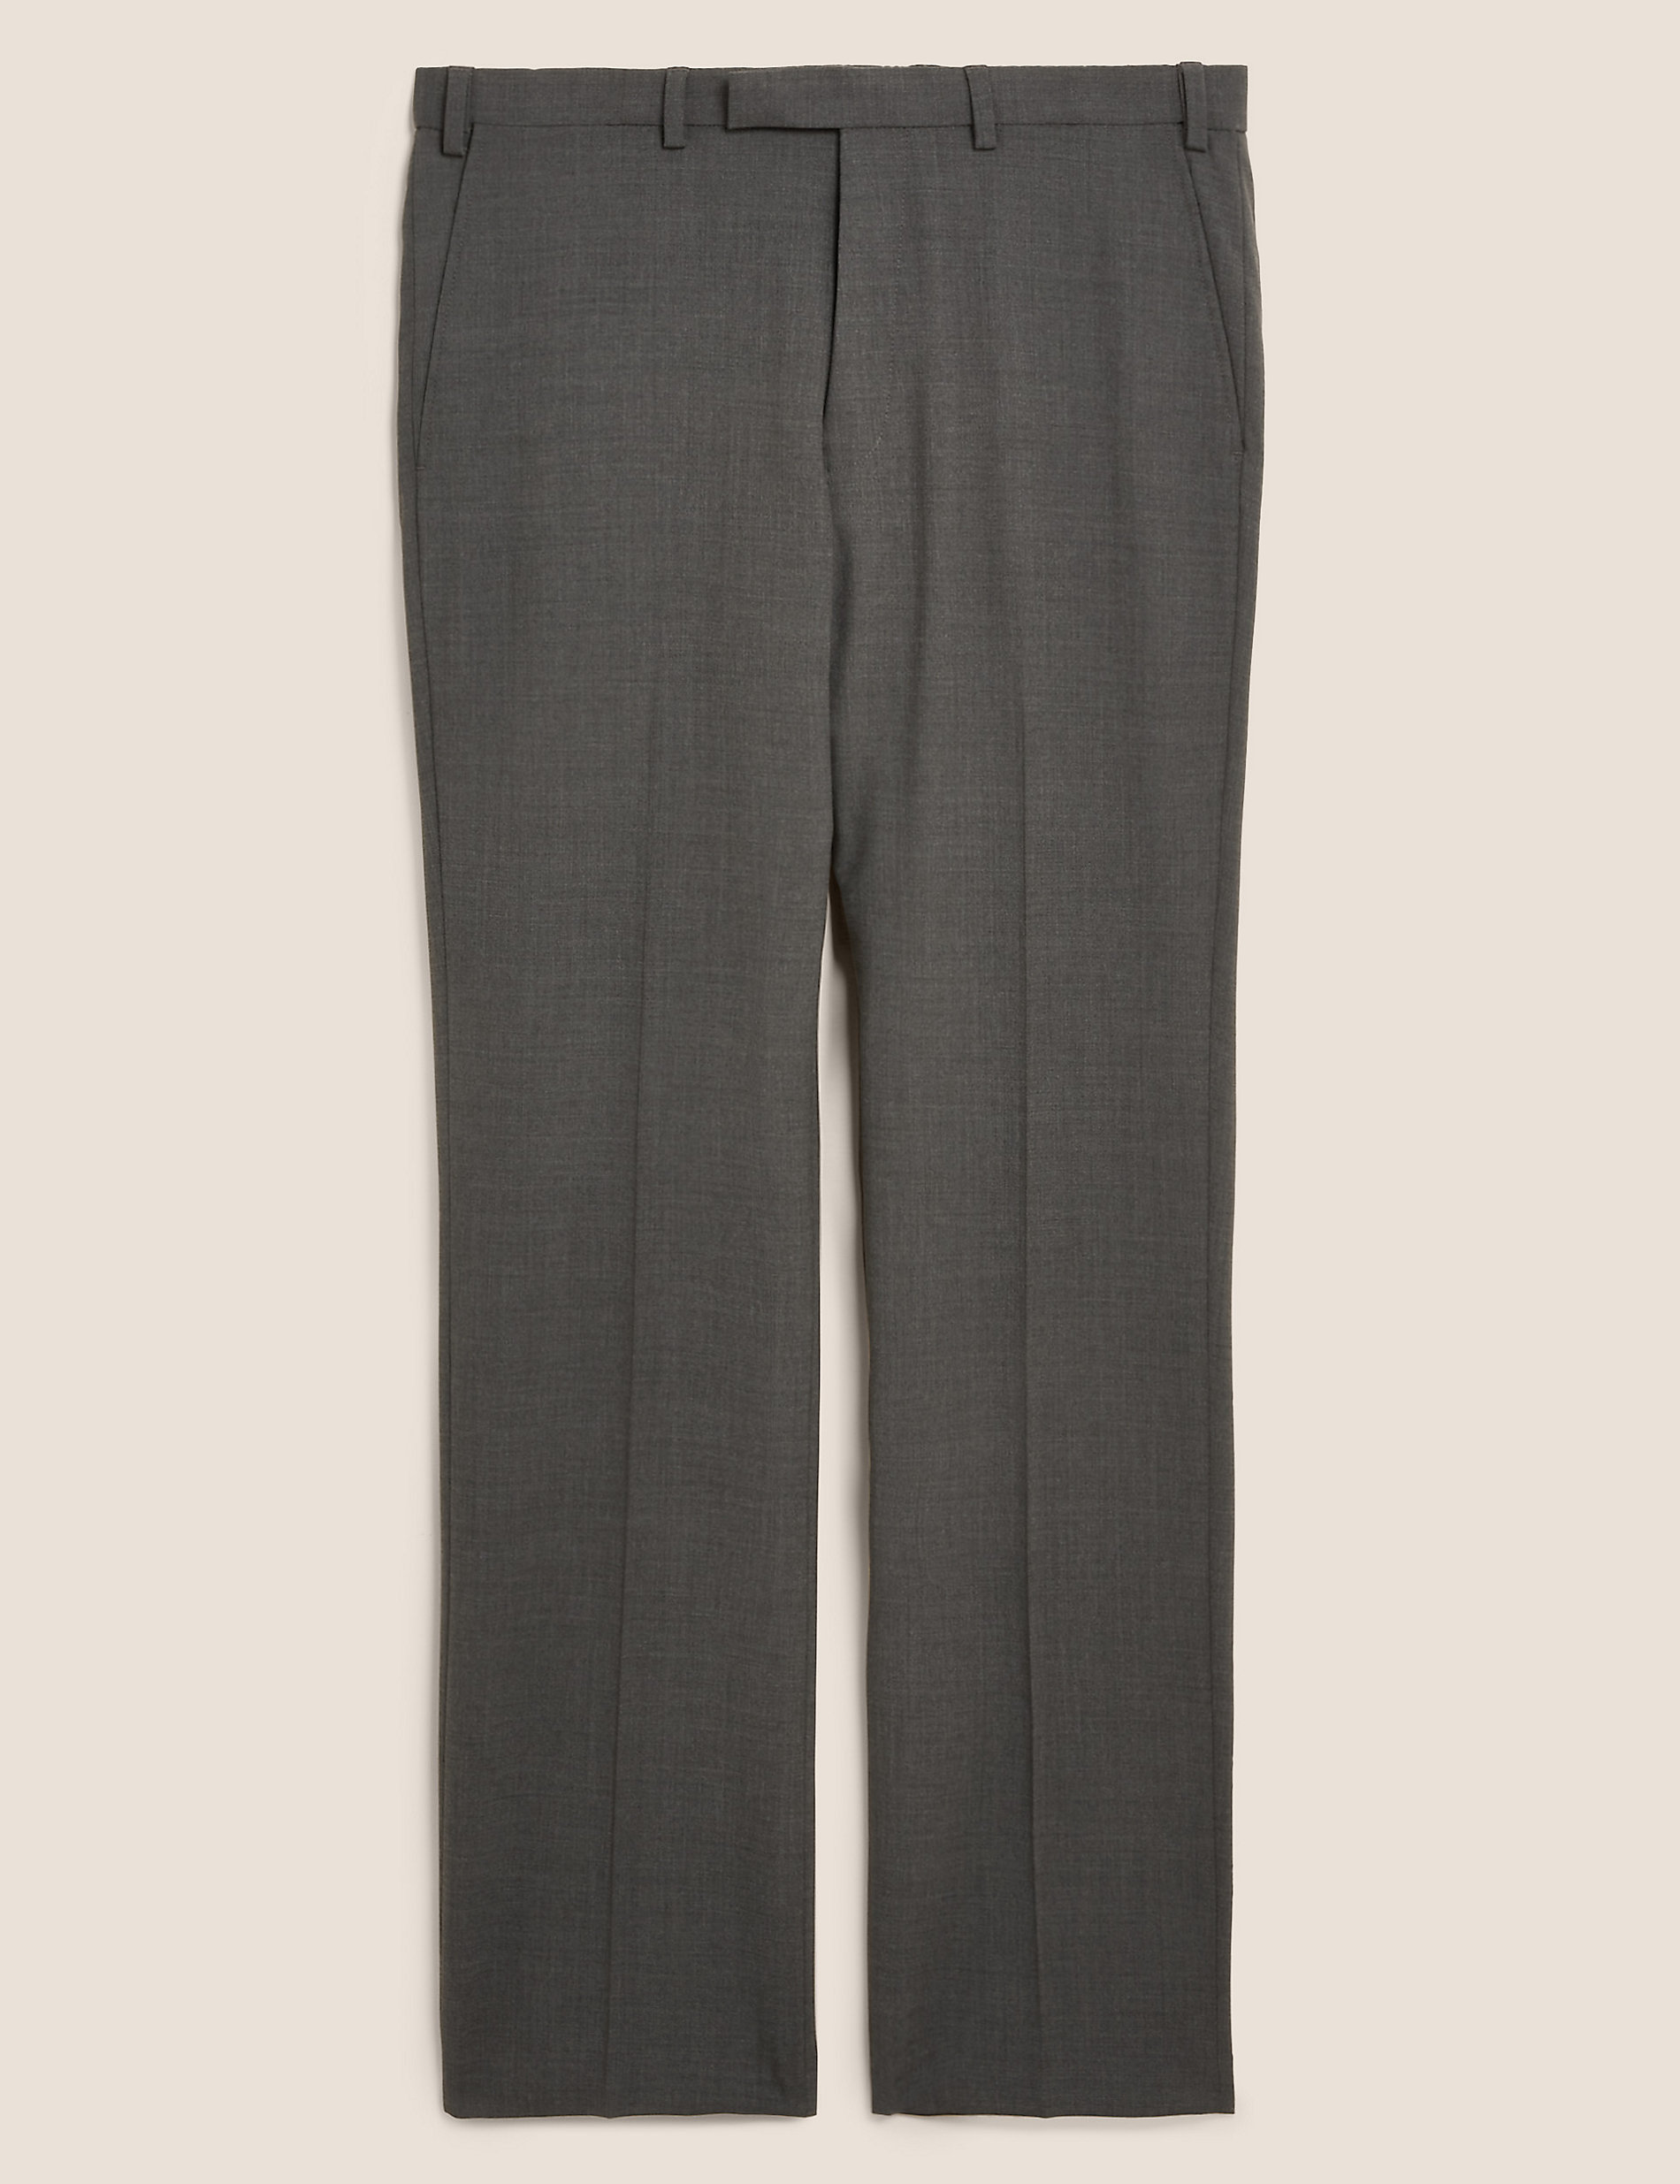 The Ultimate Charcoal Regular Fit Trousers